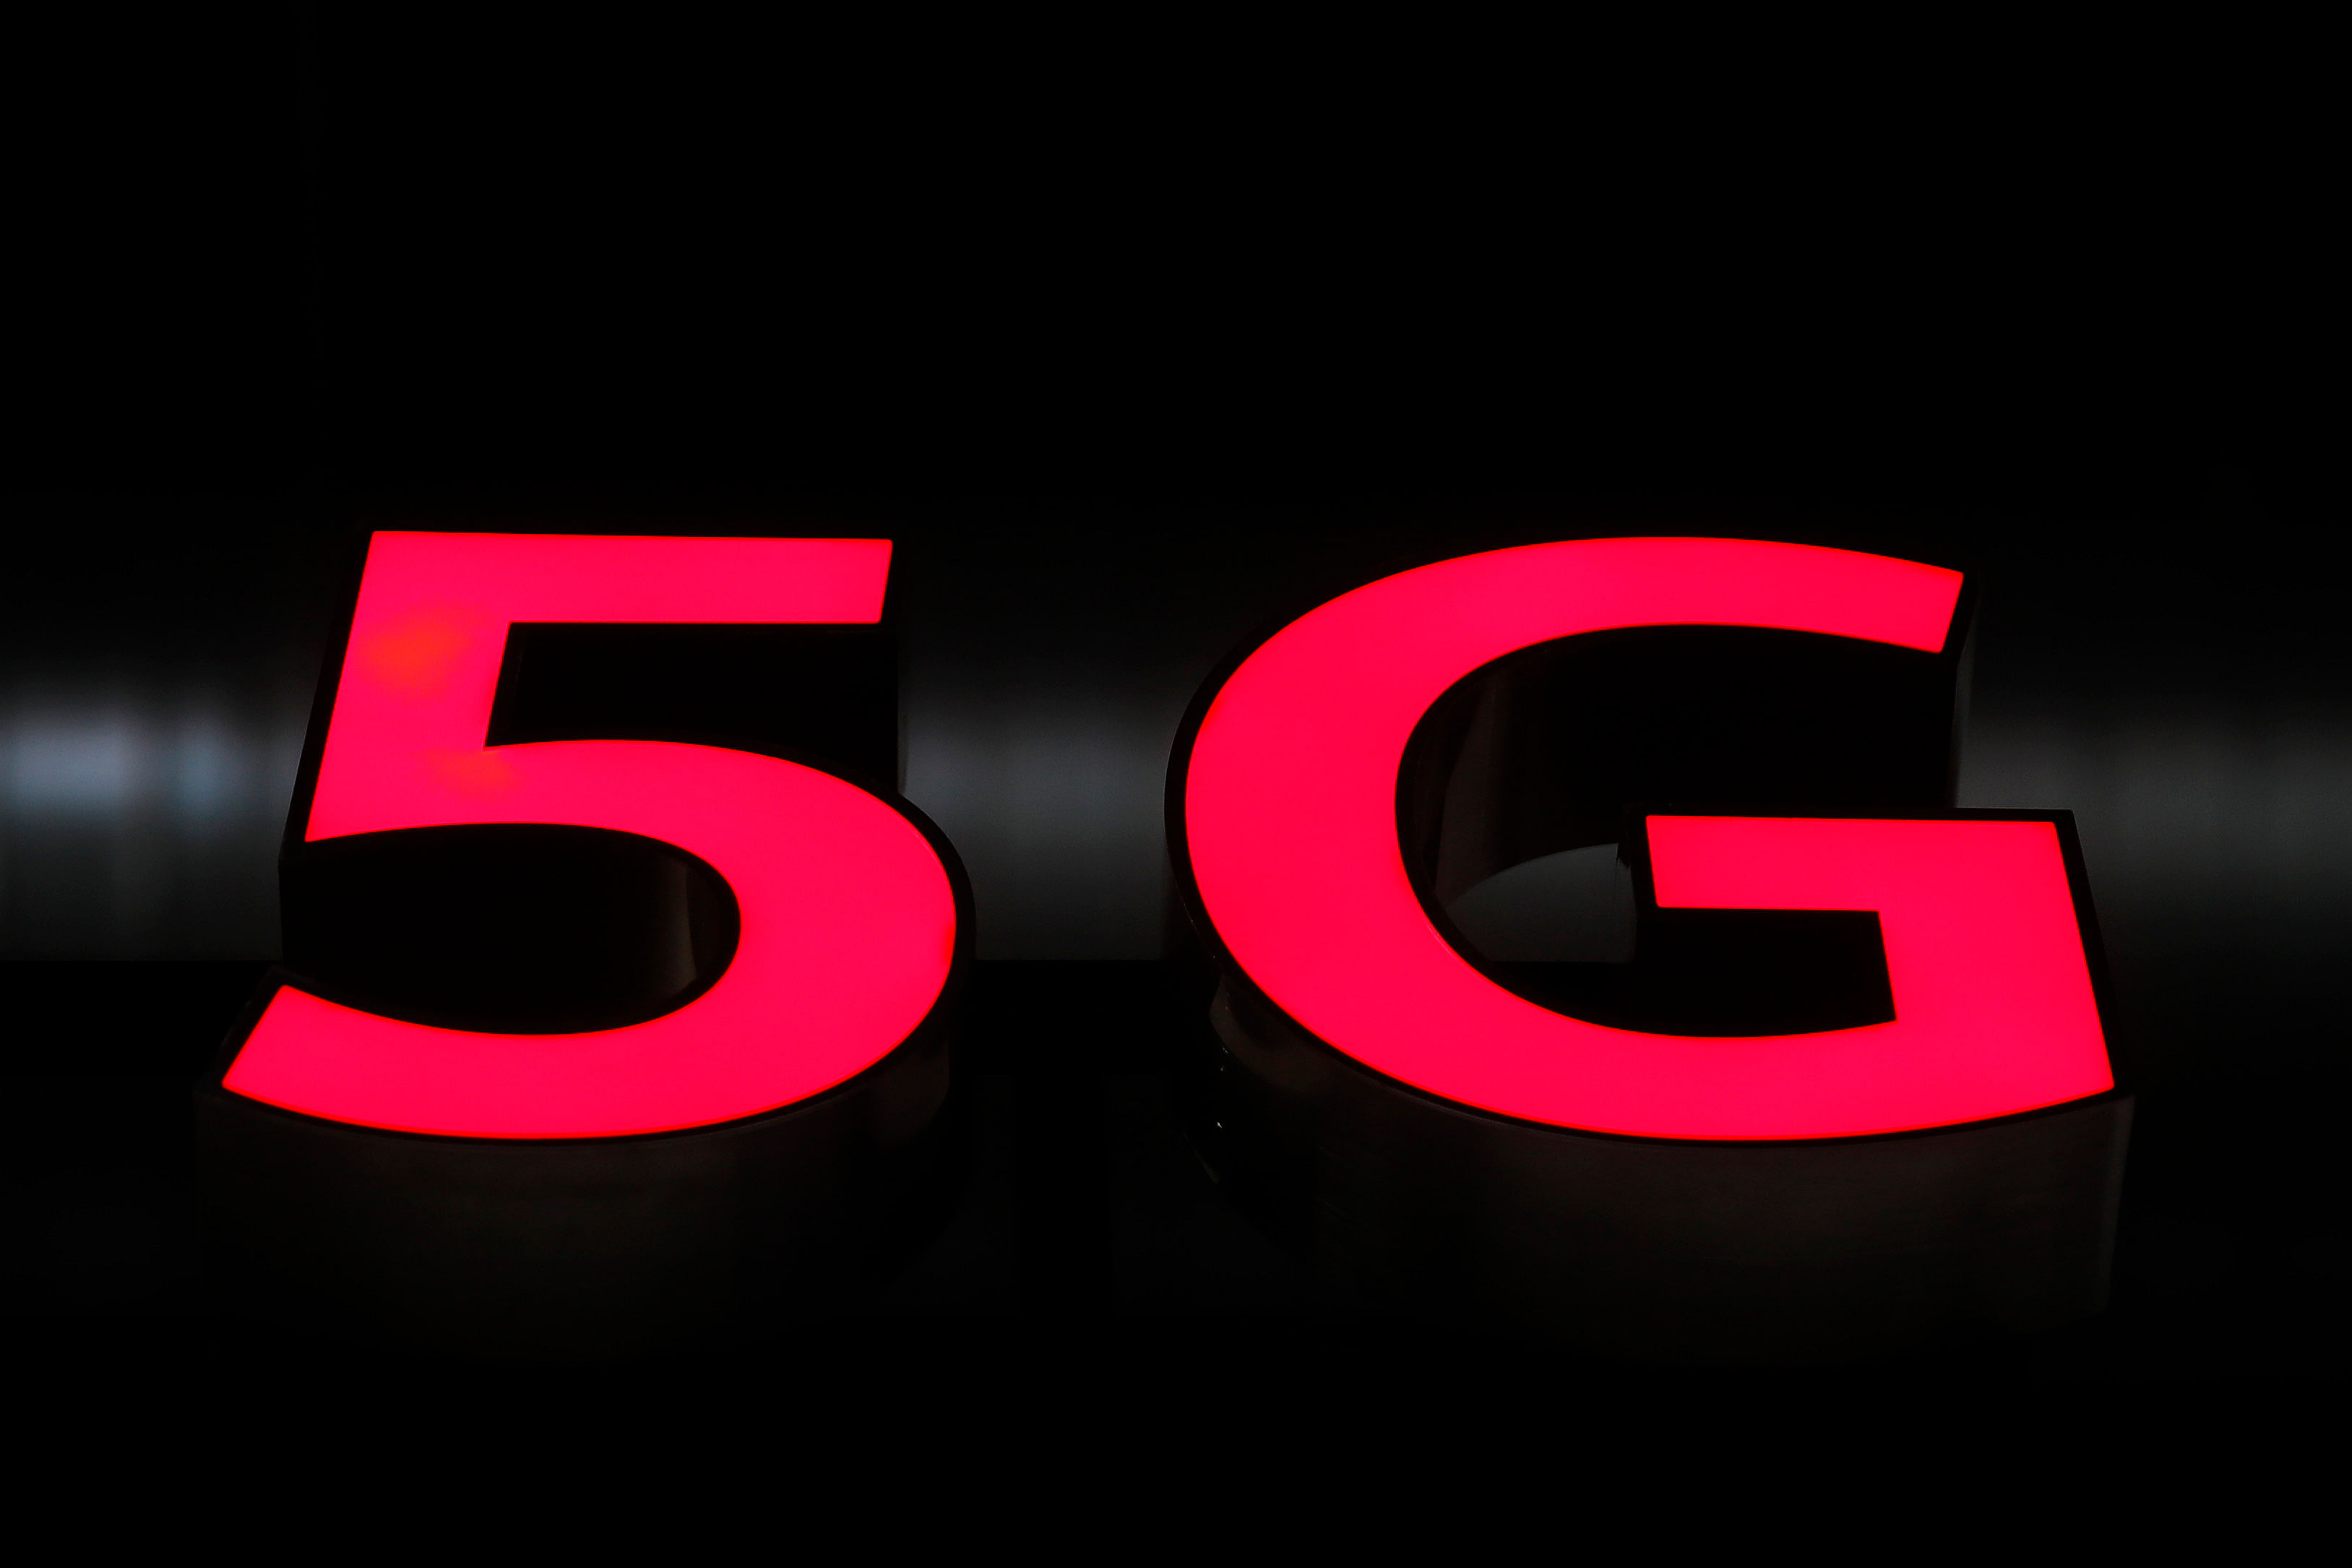 Many countries, however, have allowed telecom service providers to use Chinese gears. Now, India has also indicated its unwillingness to keep any company out of 5G trials. (AFP Photo)